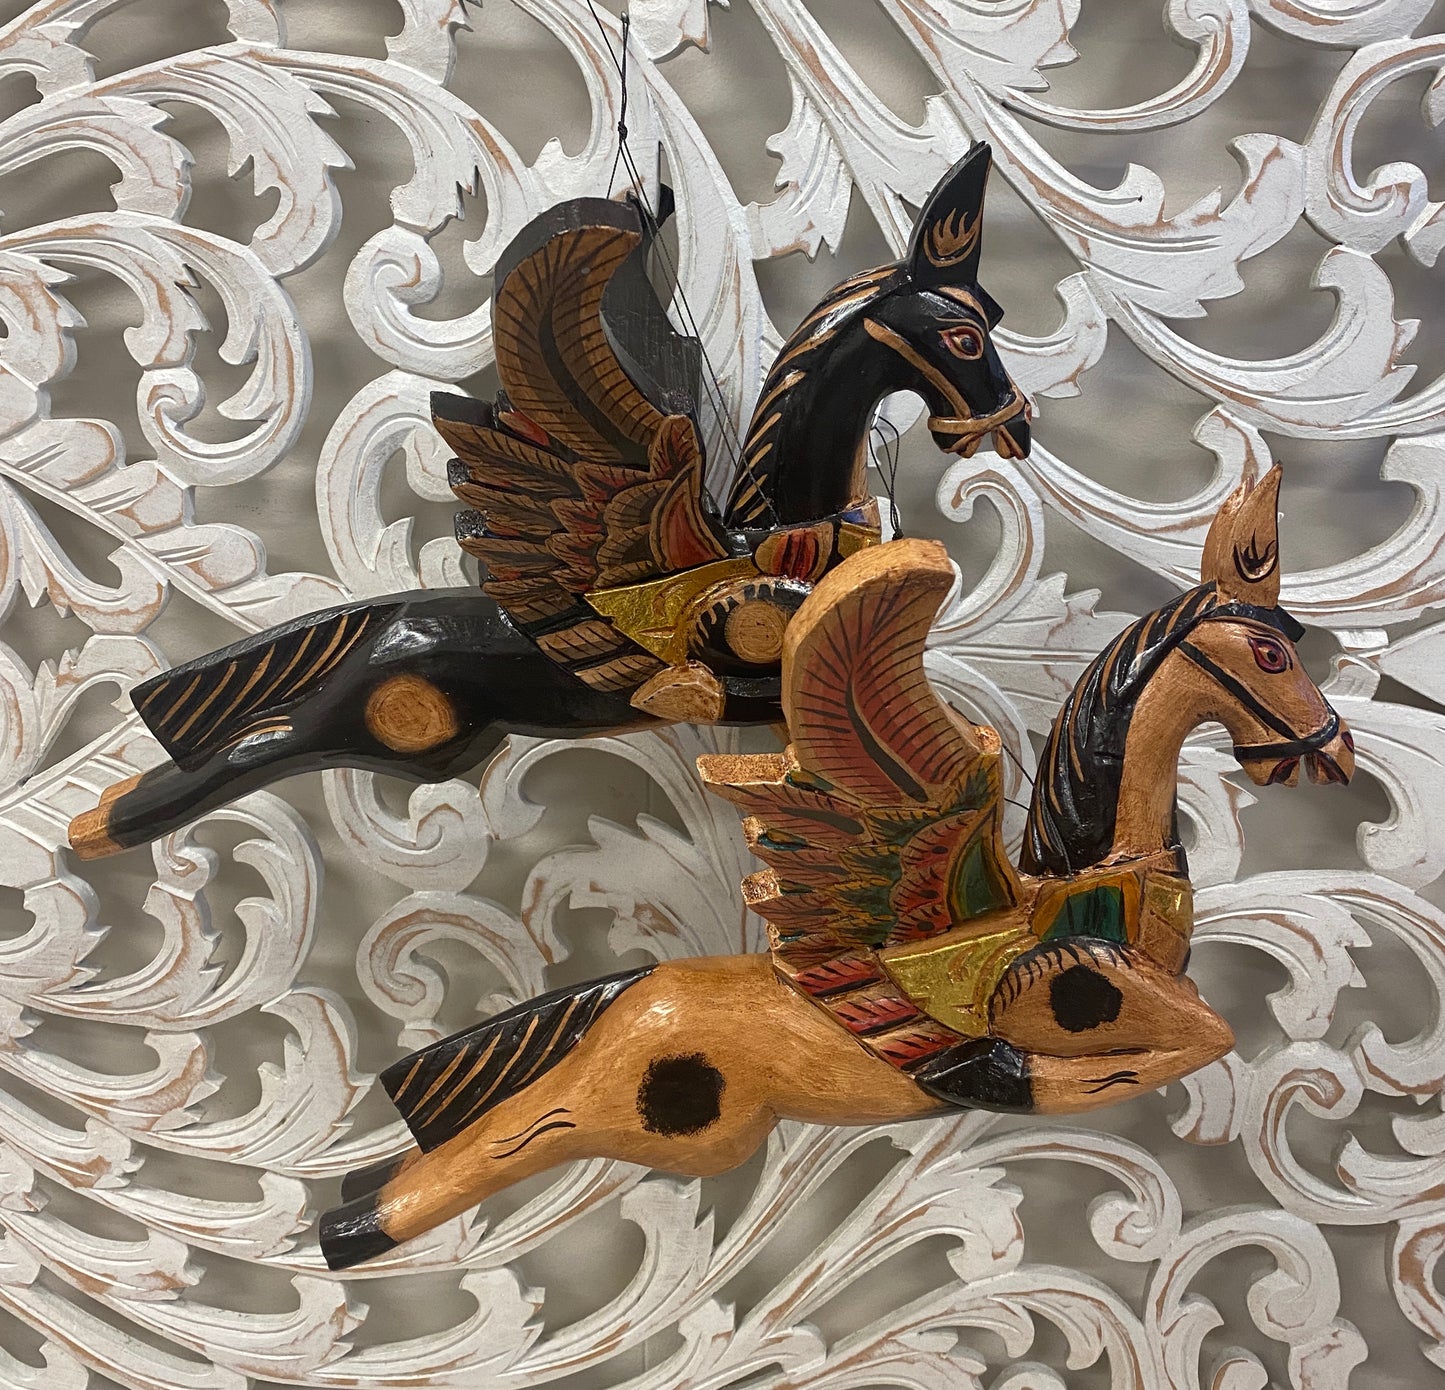 Hand Carved Flying Horse Spirit chasers - Available in 2 colors